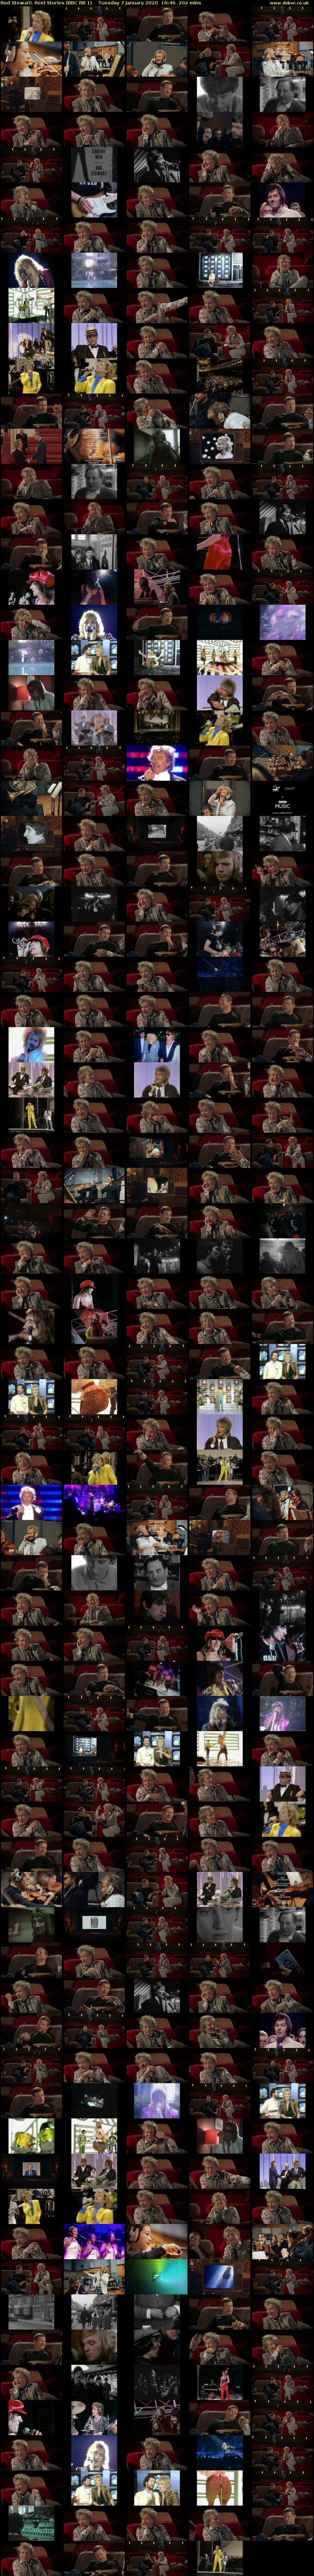 Rod Stewart: Reel Stories (BBC RB 1) Tuesday 7 January 2020 16:46 - 20:08